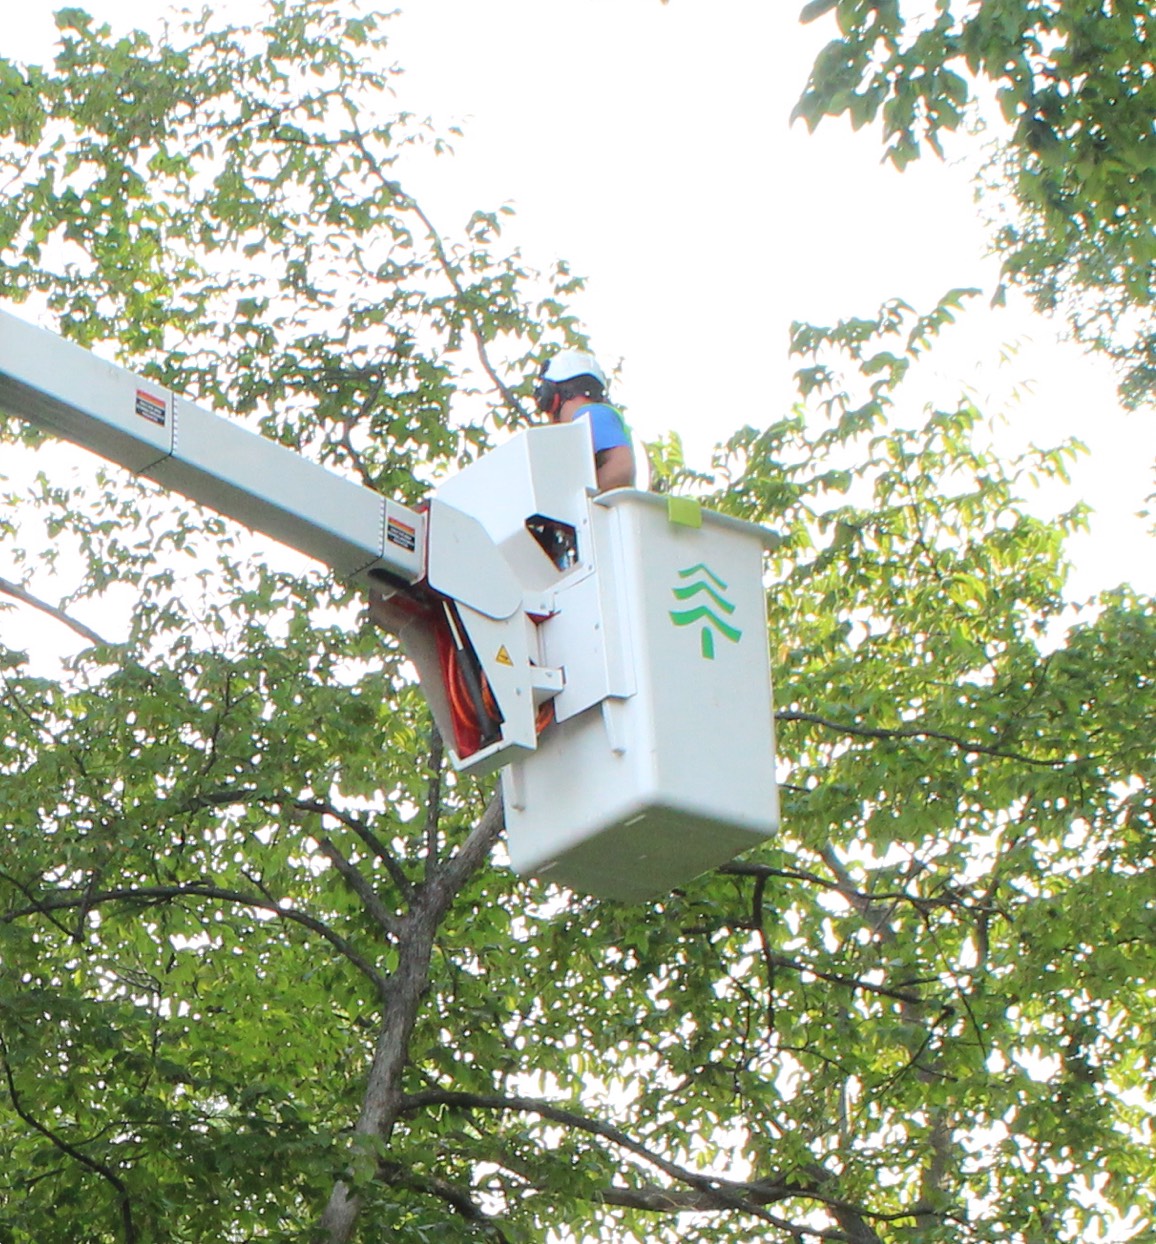 Townsend Arborcare tree pruning and trimming specialists keep trees healthy by removing branches that can be detrimental.